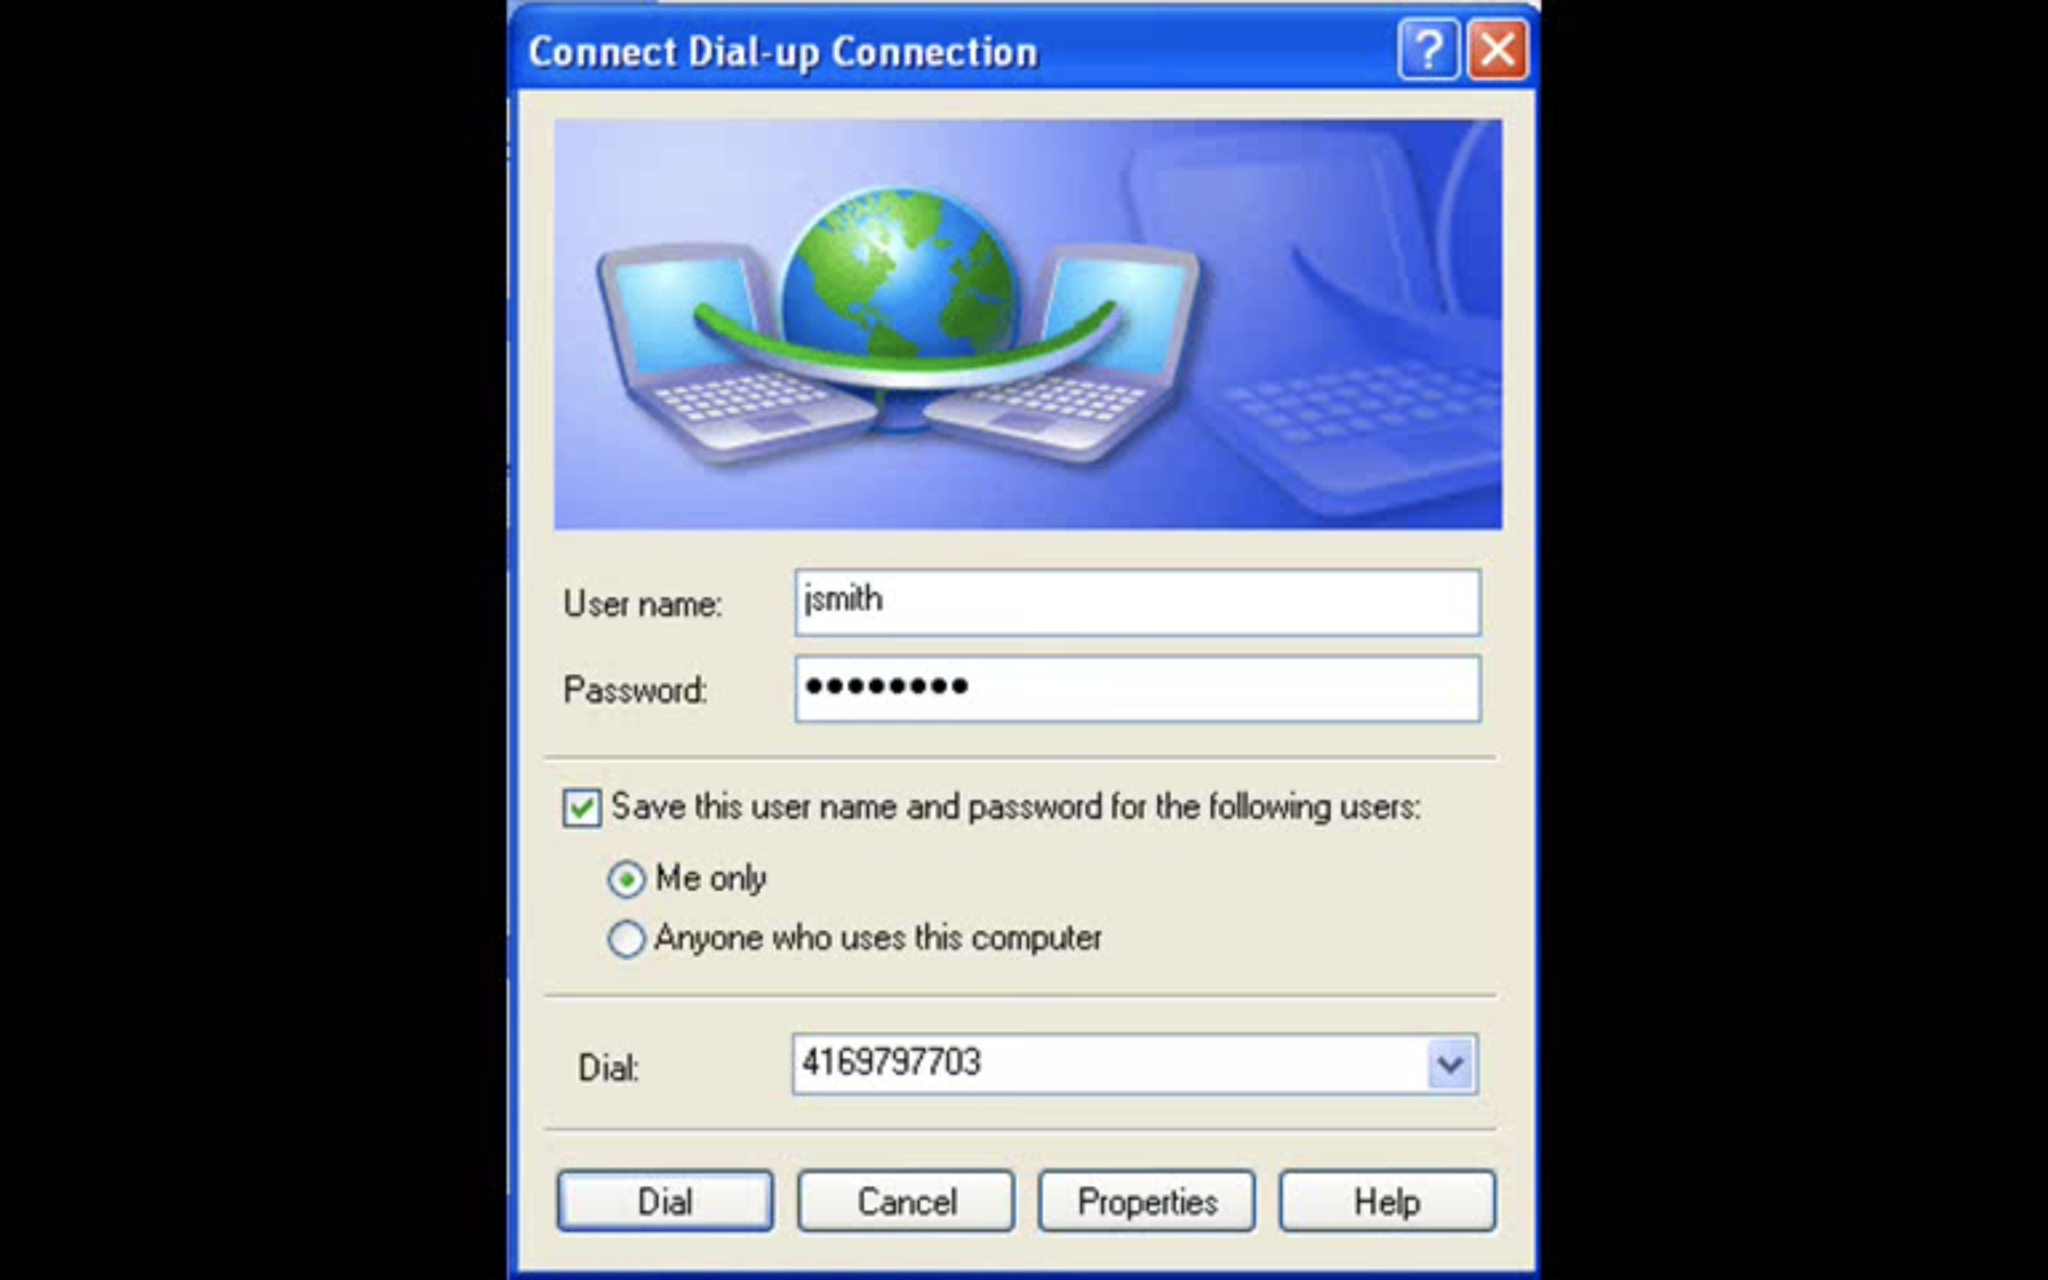 AT&T DIAL UP INTERNET